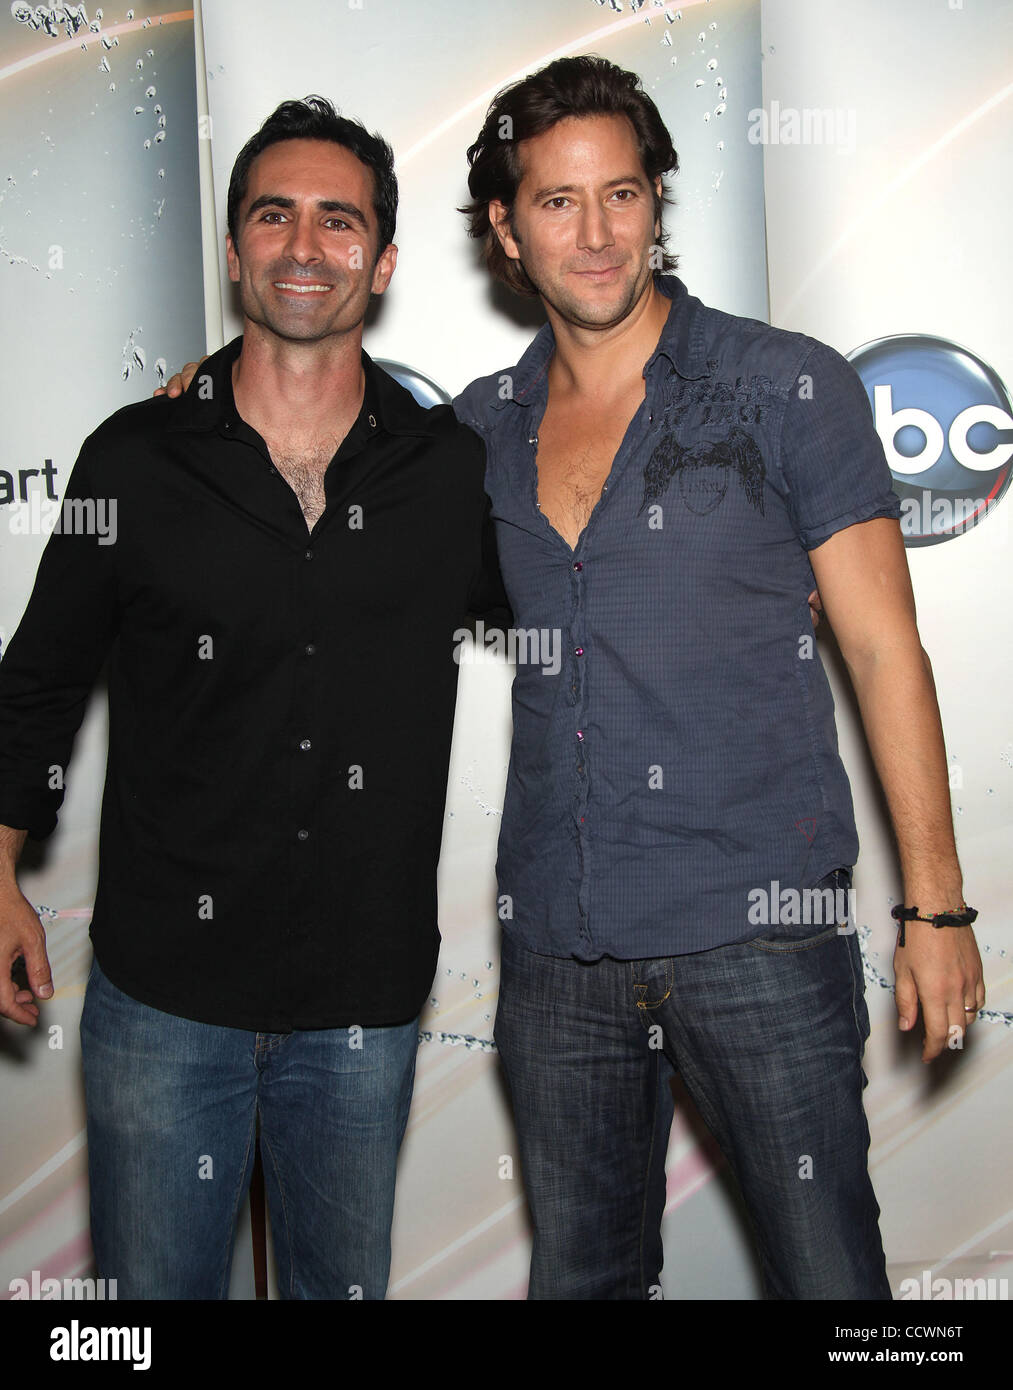 May 15, 2010 - Burbank, California, U.S. - NESTOR CARBONELL and HENRY IAN CUSICK arrives at the Disney and ABC Television Group Summer press junket at ABC in Burbank. (Credit Image: © Lisa O'Connor/ZUMA Press) Stock Photo